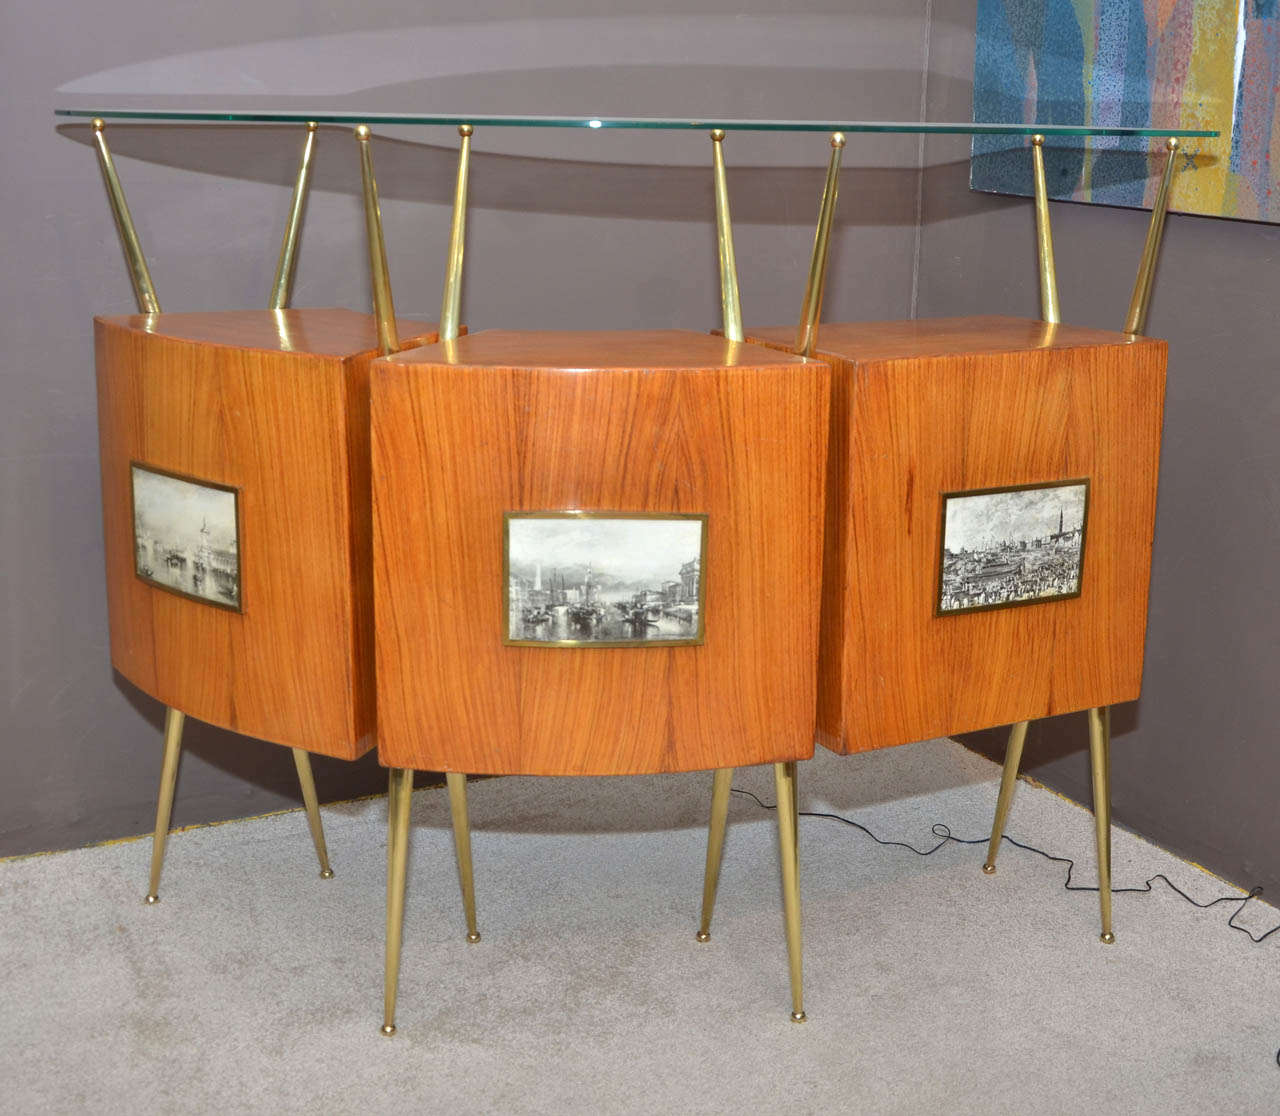 1950's Italian dry bar. Rosewood, bronze, brass and glass top. Venetian decor prints on the front. Three trunks with two drawers. Marks of drinking glasses on one place on the the wood top. Missing trunk glass shelves. Good condition. Normal wear